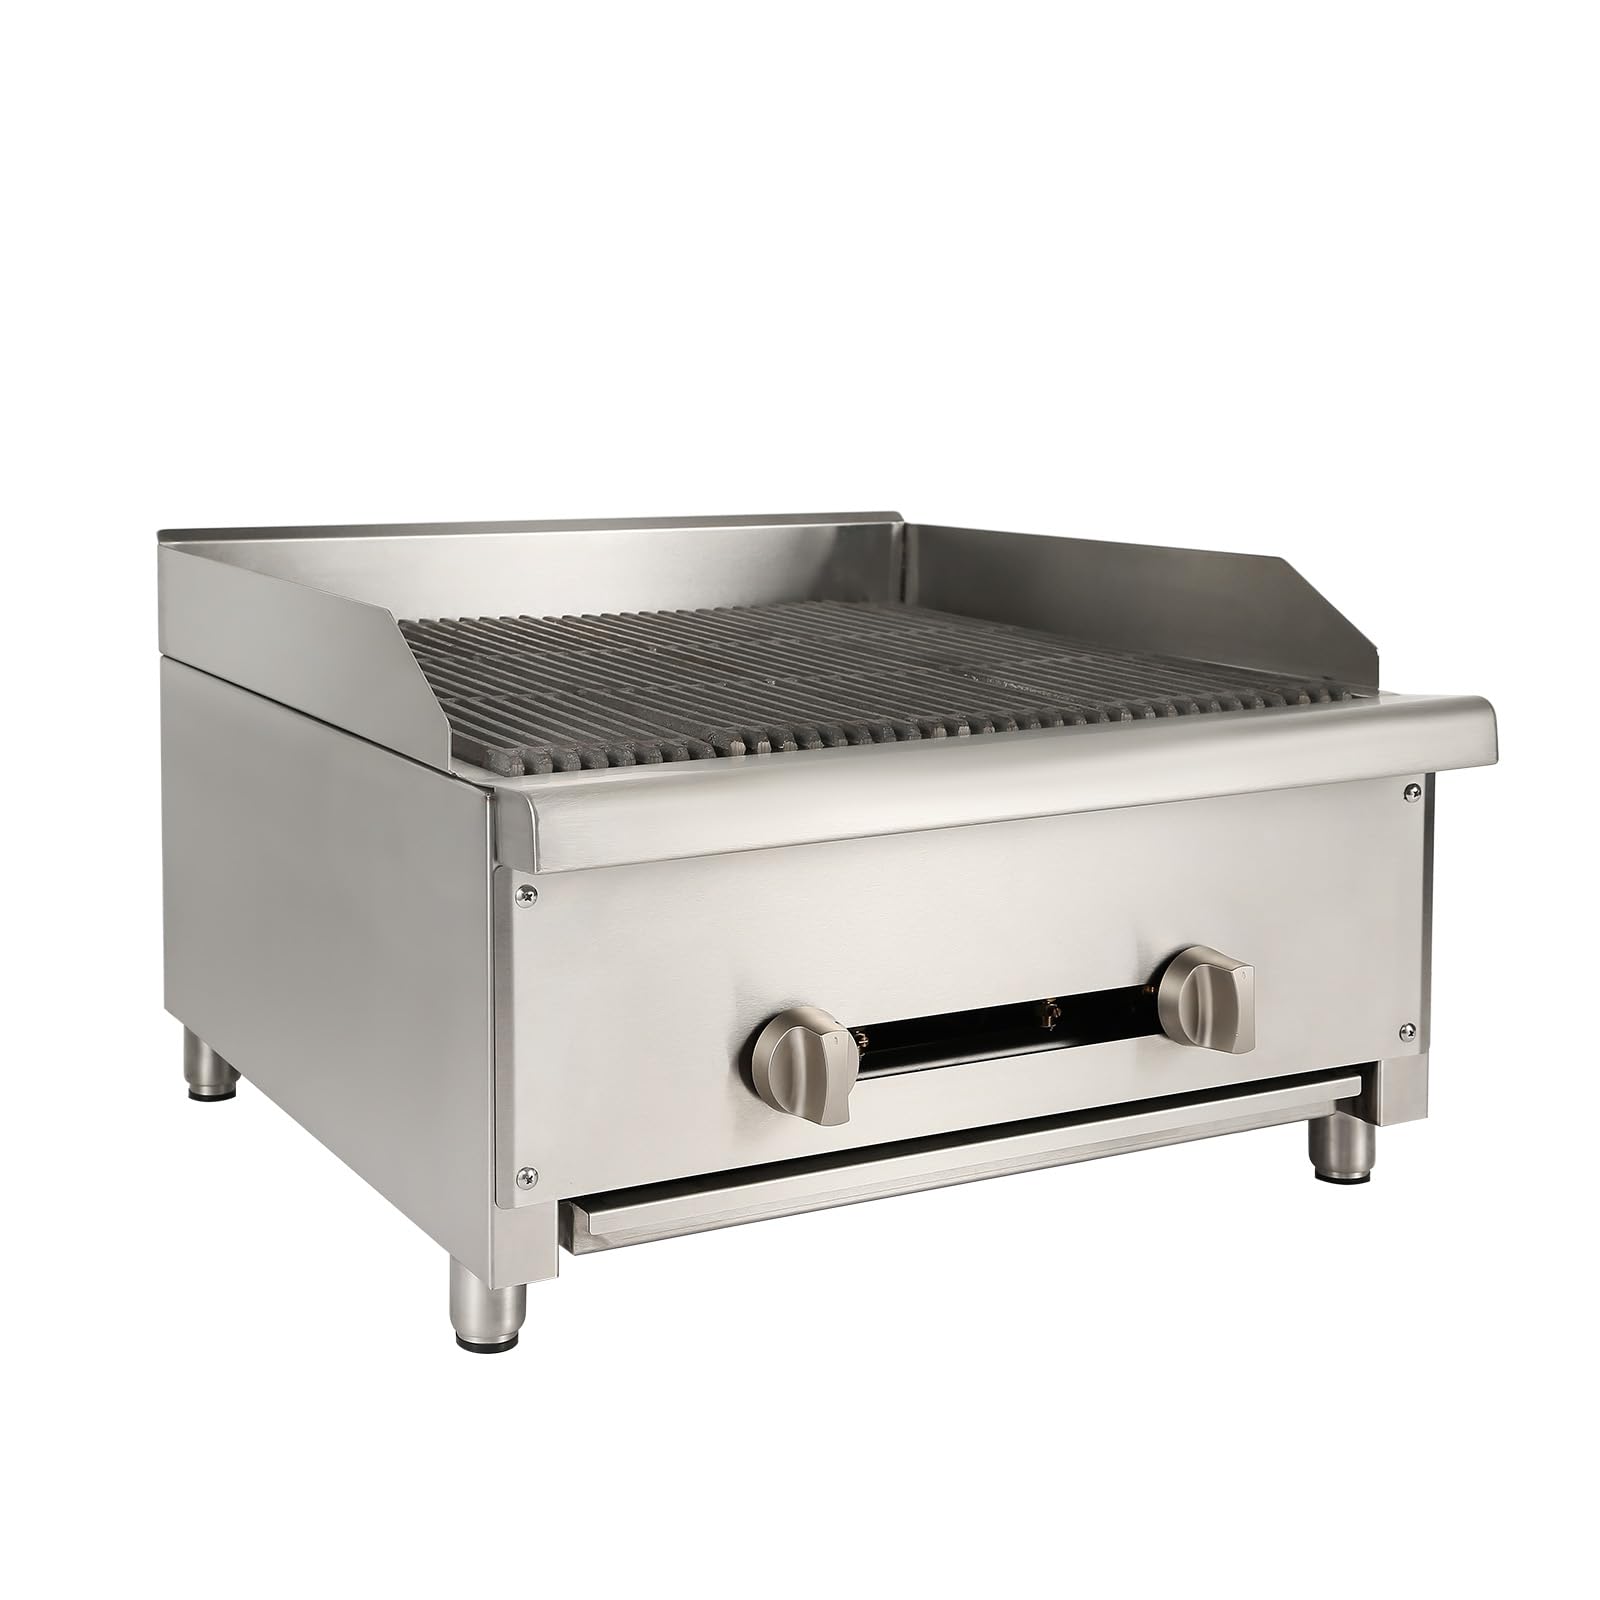 HOCCOT 24” Commercial Gas Grill Radiant Charbroiler